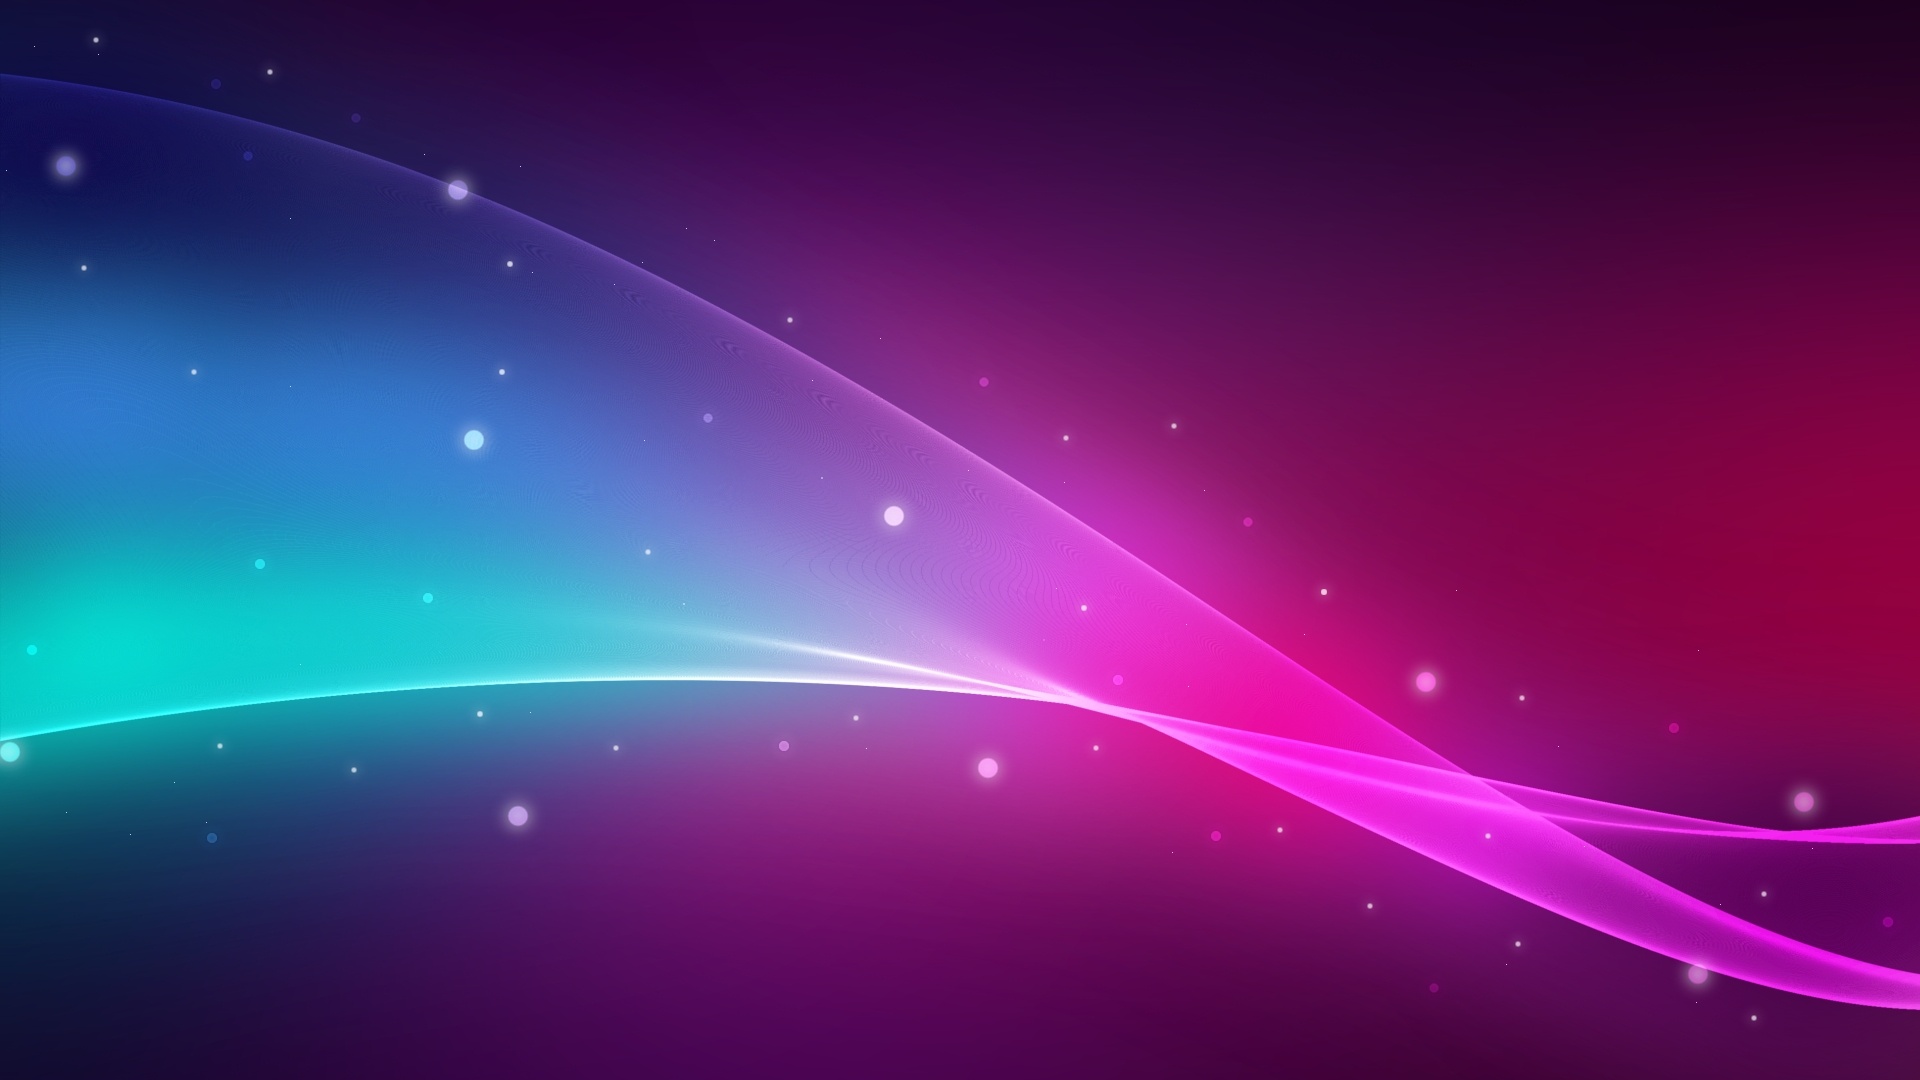 Pink Purple And Blue Wallpaper   HD Wallpapers Pretty 1920x1080